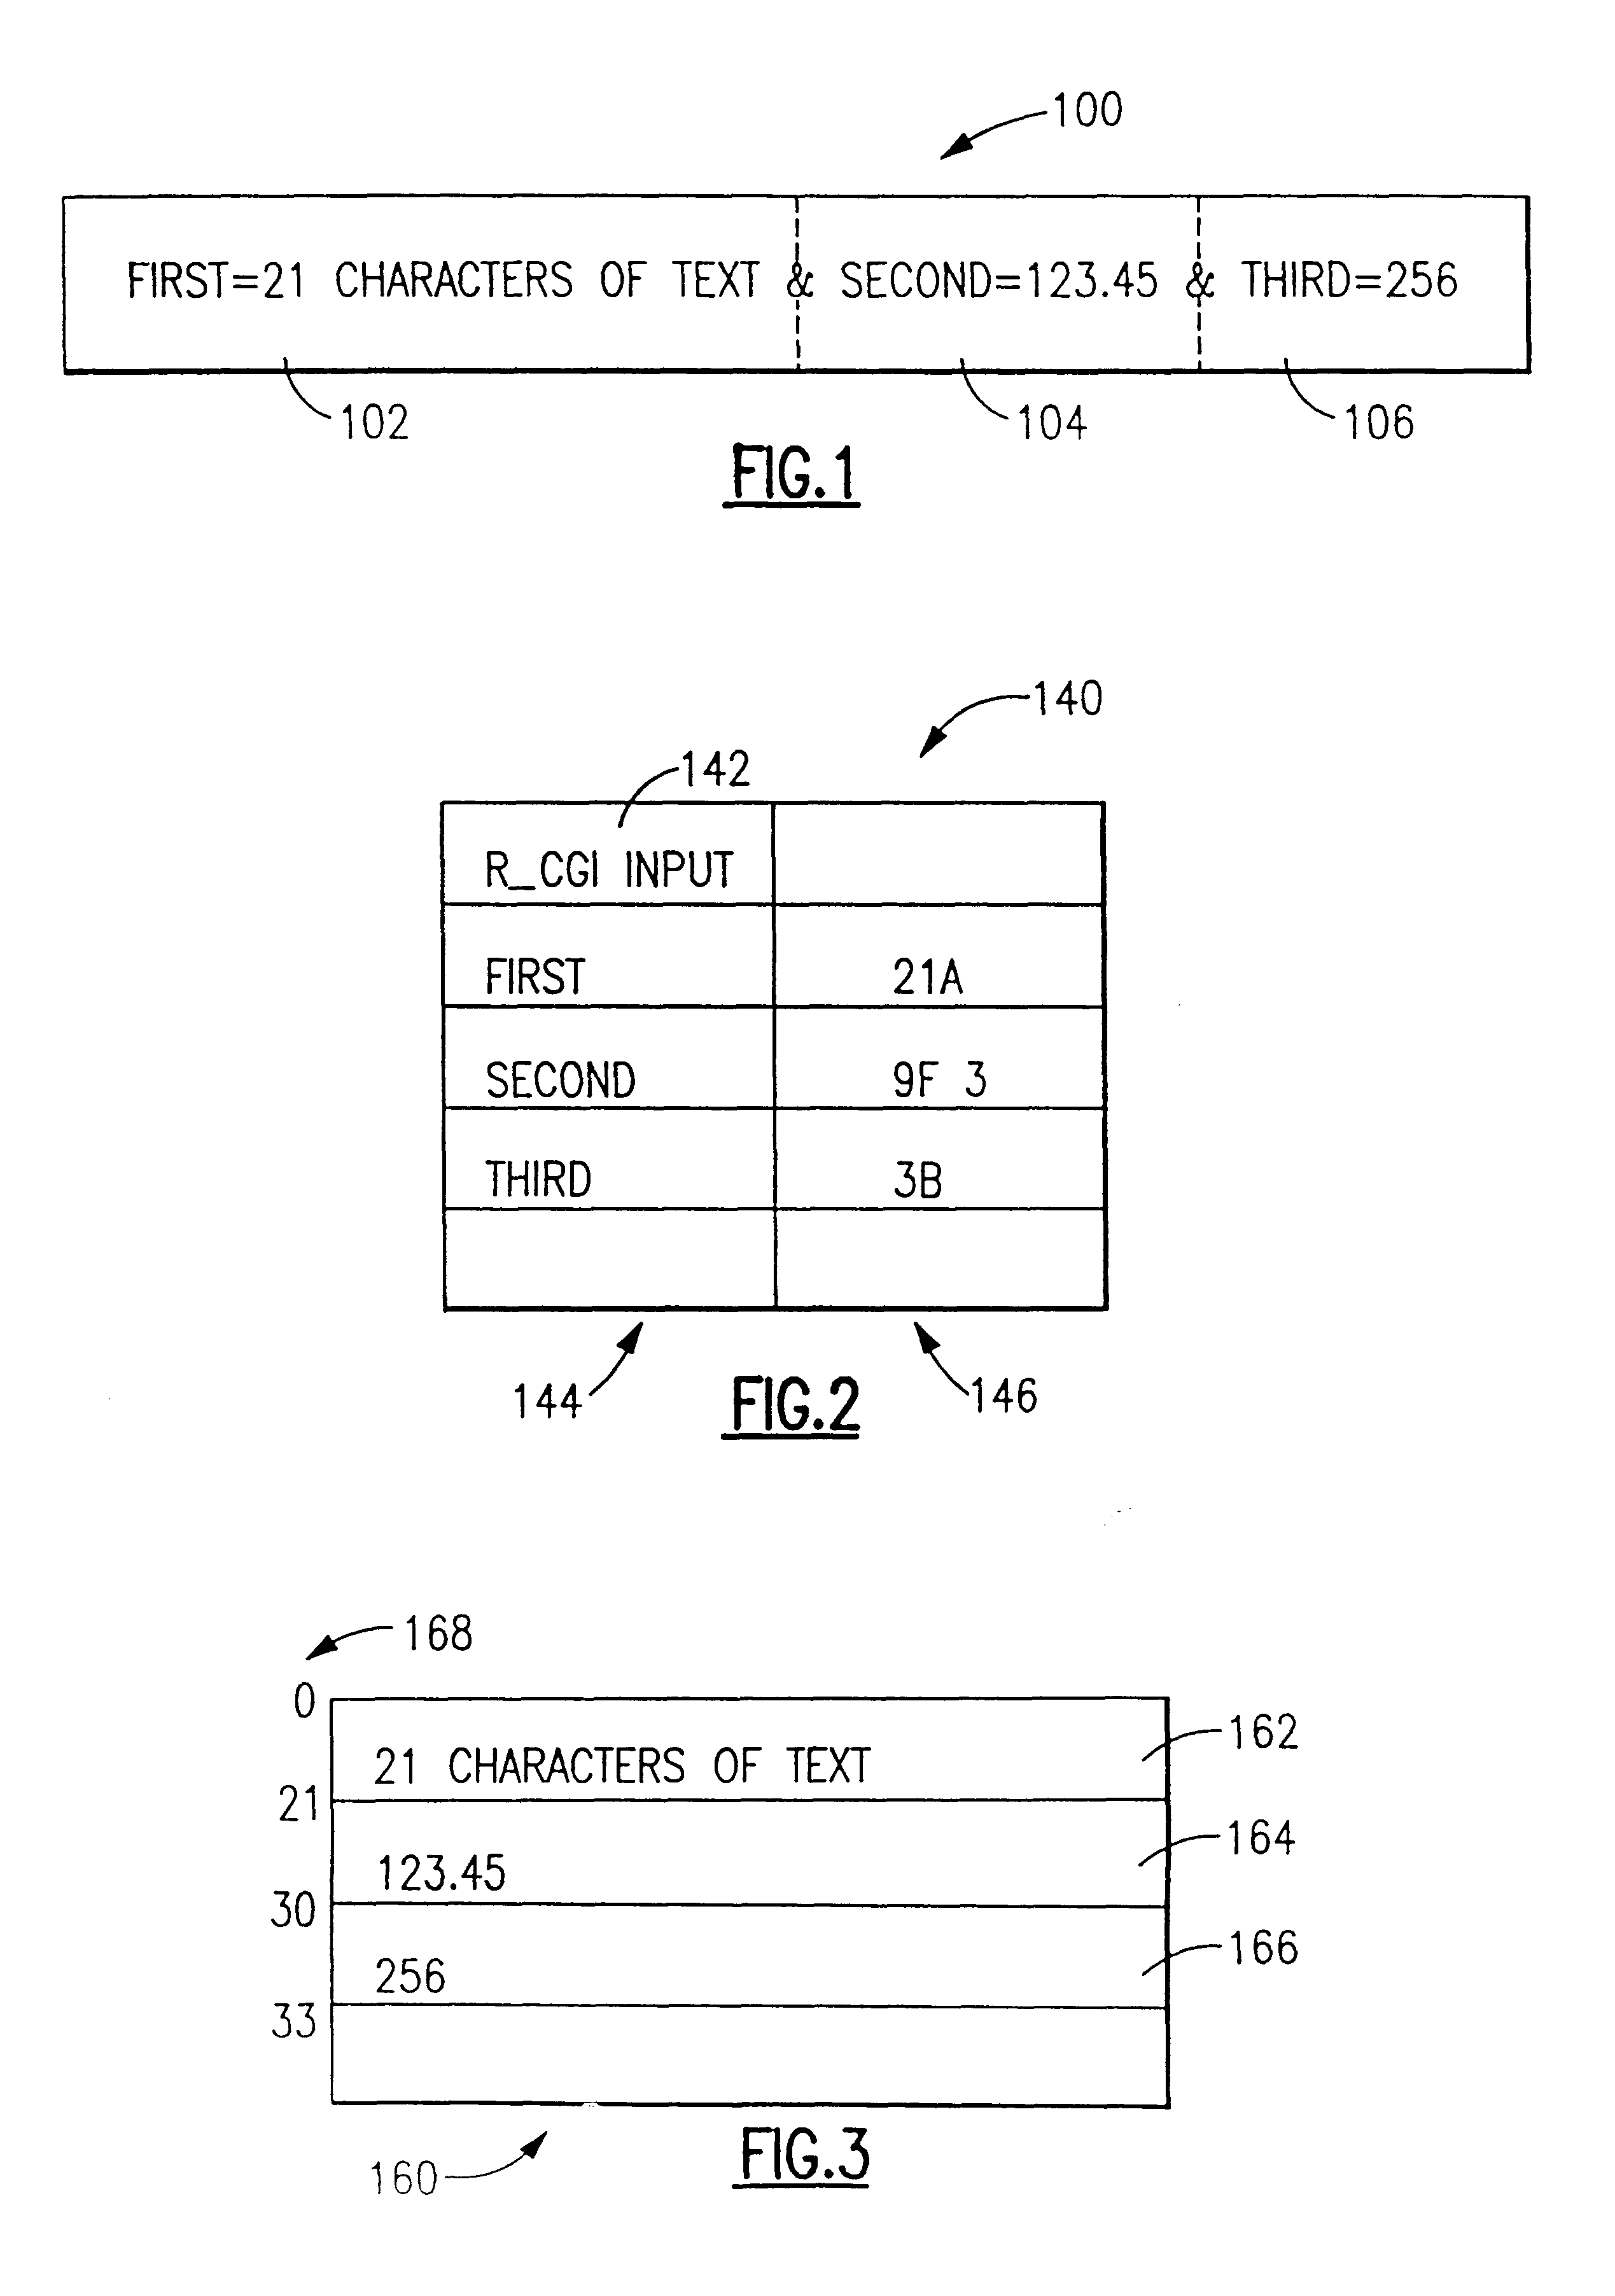 System and method for building a data structure of converted values without keywords from an input string including keyword/text value pairs